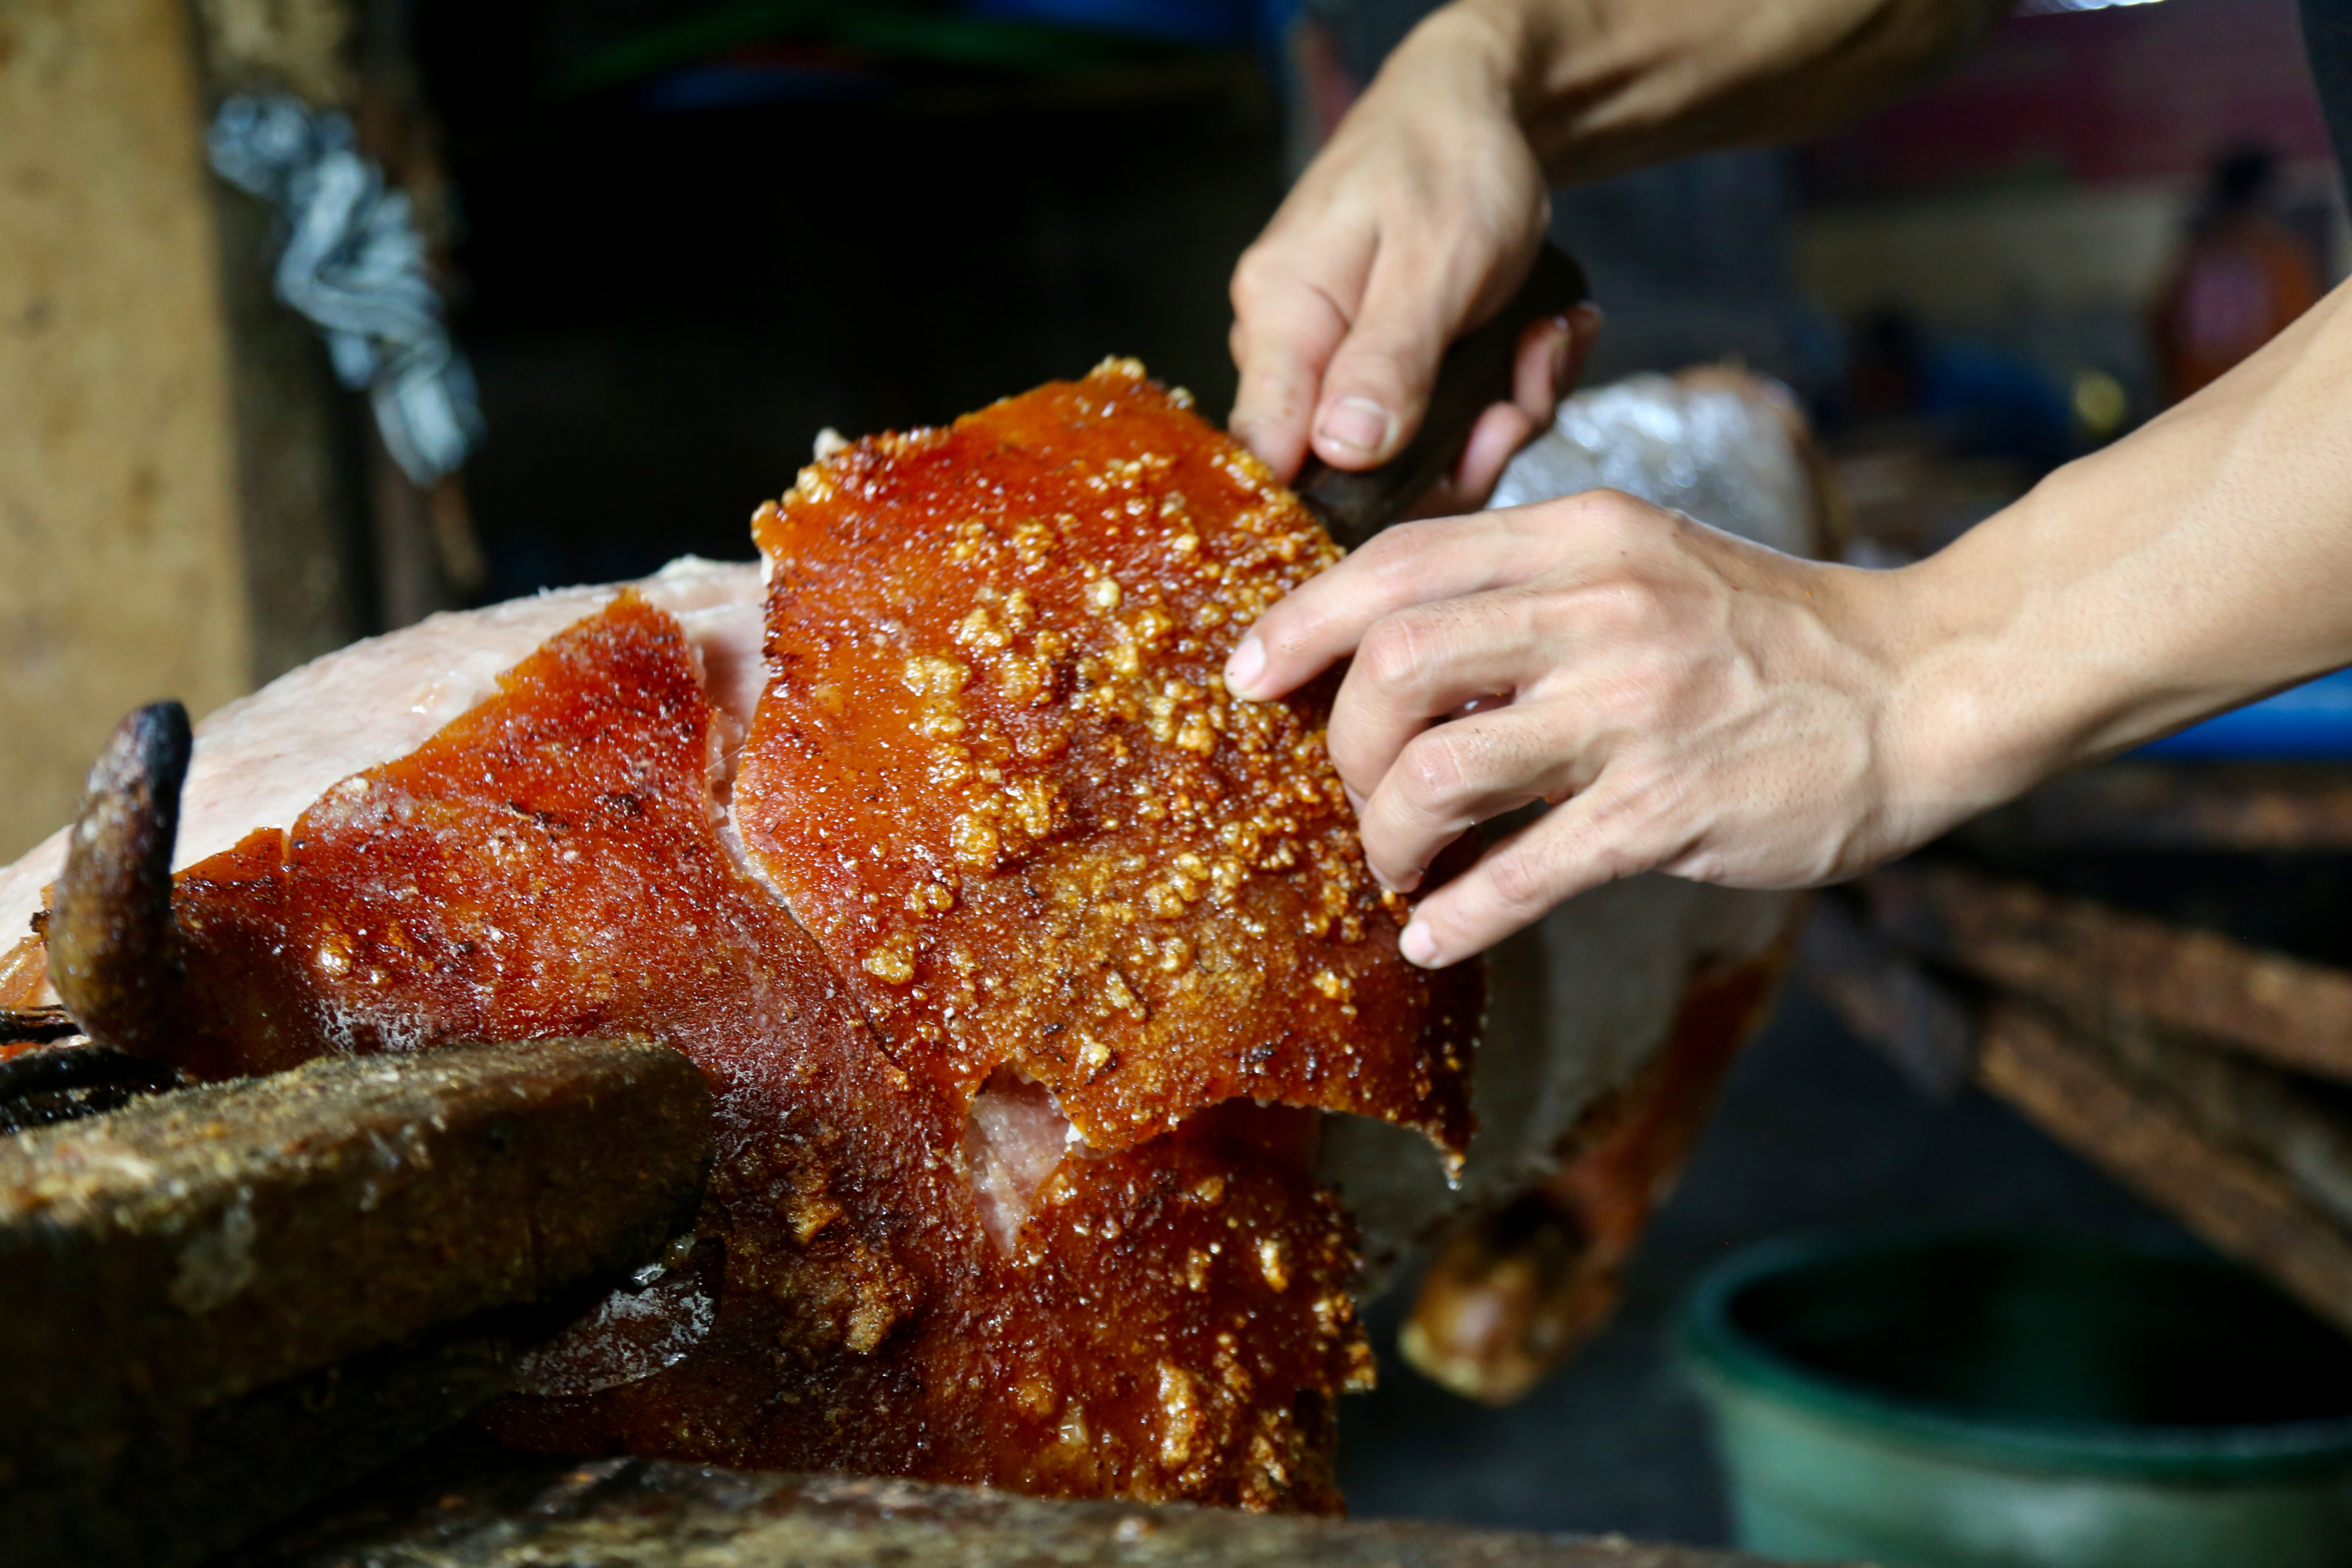 Carving spit-roasted pork at at Babi Guling Slingsing, in Pengayehan on Bali’s west coast. “Babi guling”, or turning pig was rated by late food legend Anthony Bourdain rated the most succulent pork he had ever had. Photo: Ian Lloyd Neubauer